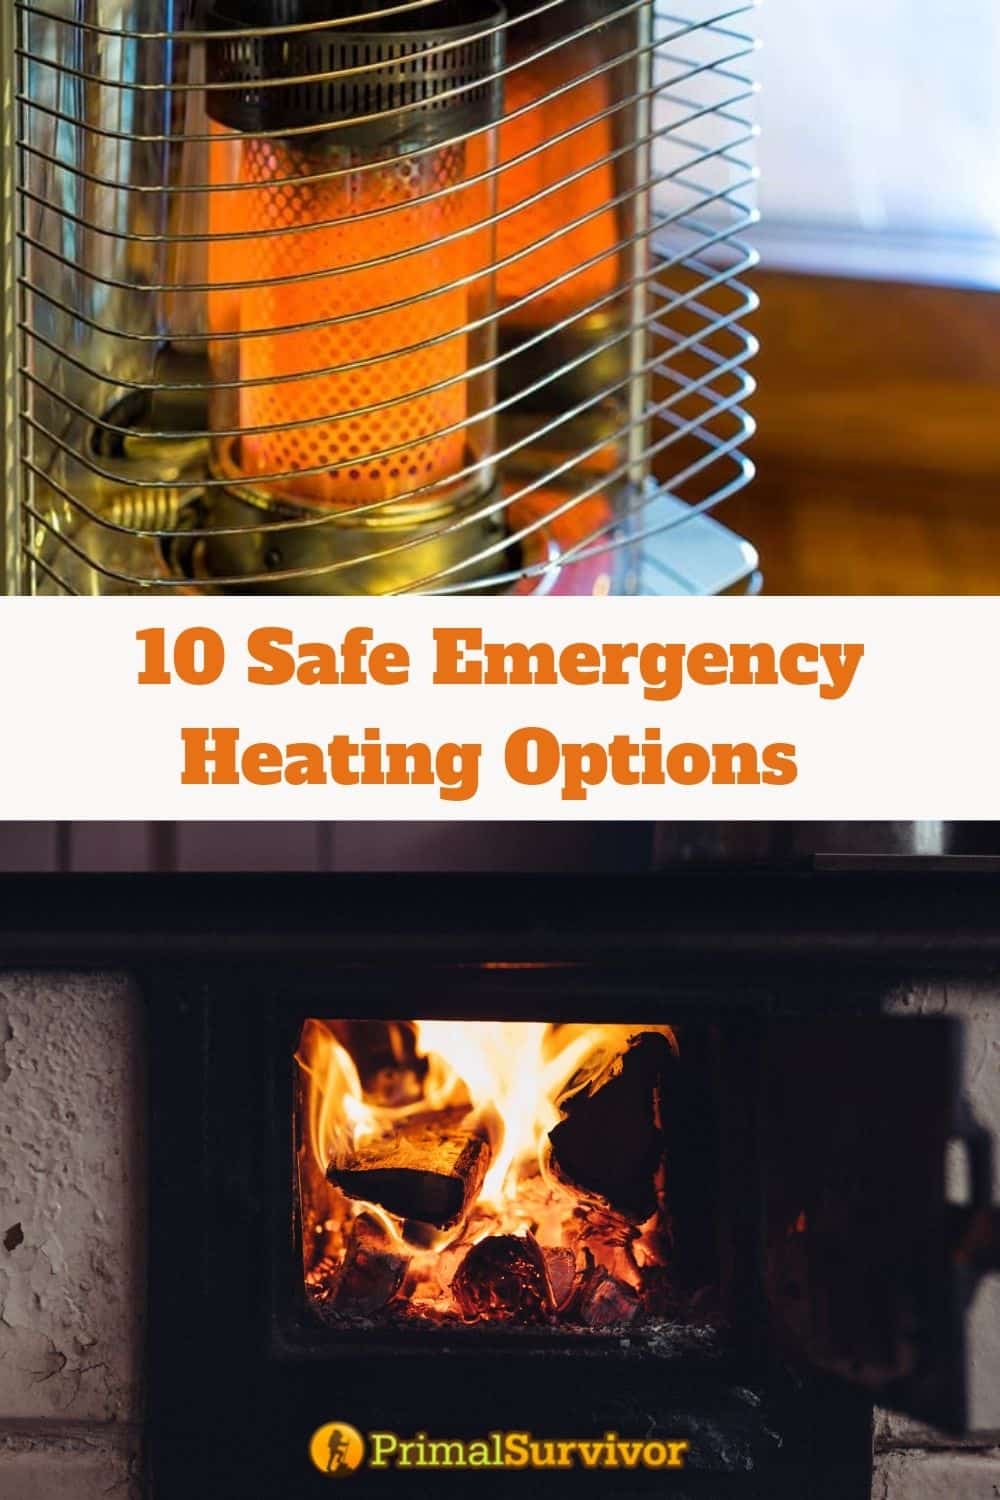 10 Safe Indoor Emergency Heating Options Heat Your Home in an